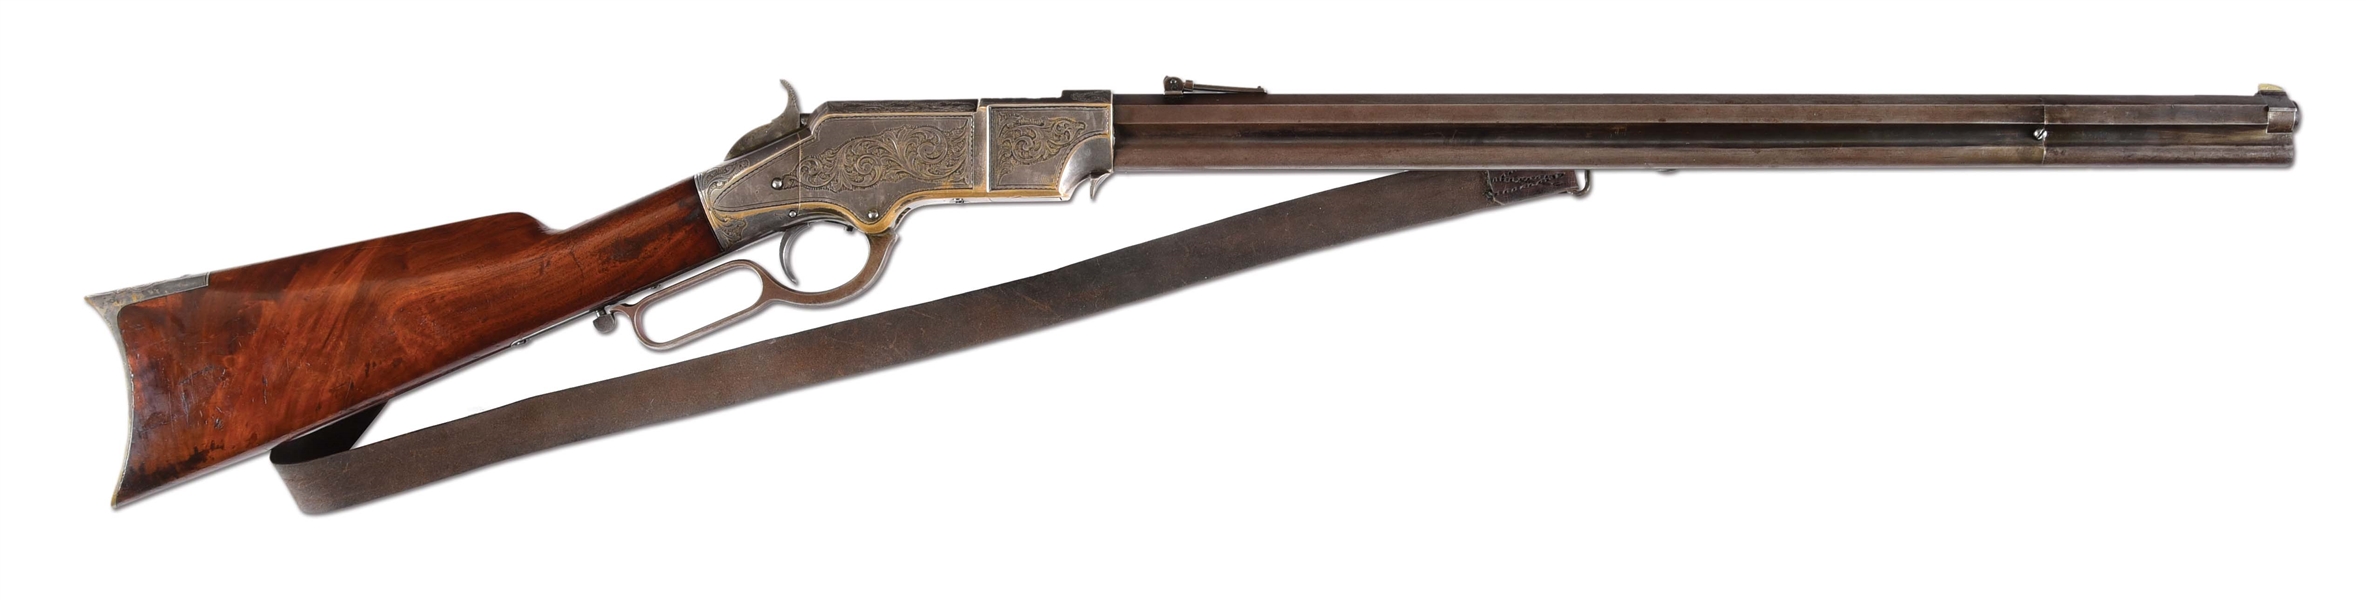 (A) FINE FACTORY HOGGSON ENGRAVED NEW HAVEN ARMS MODEL 1860 HENRY LEVER ACTION RIFLE.